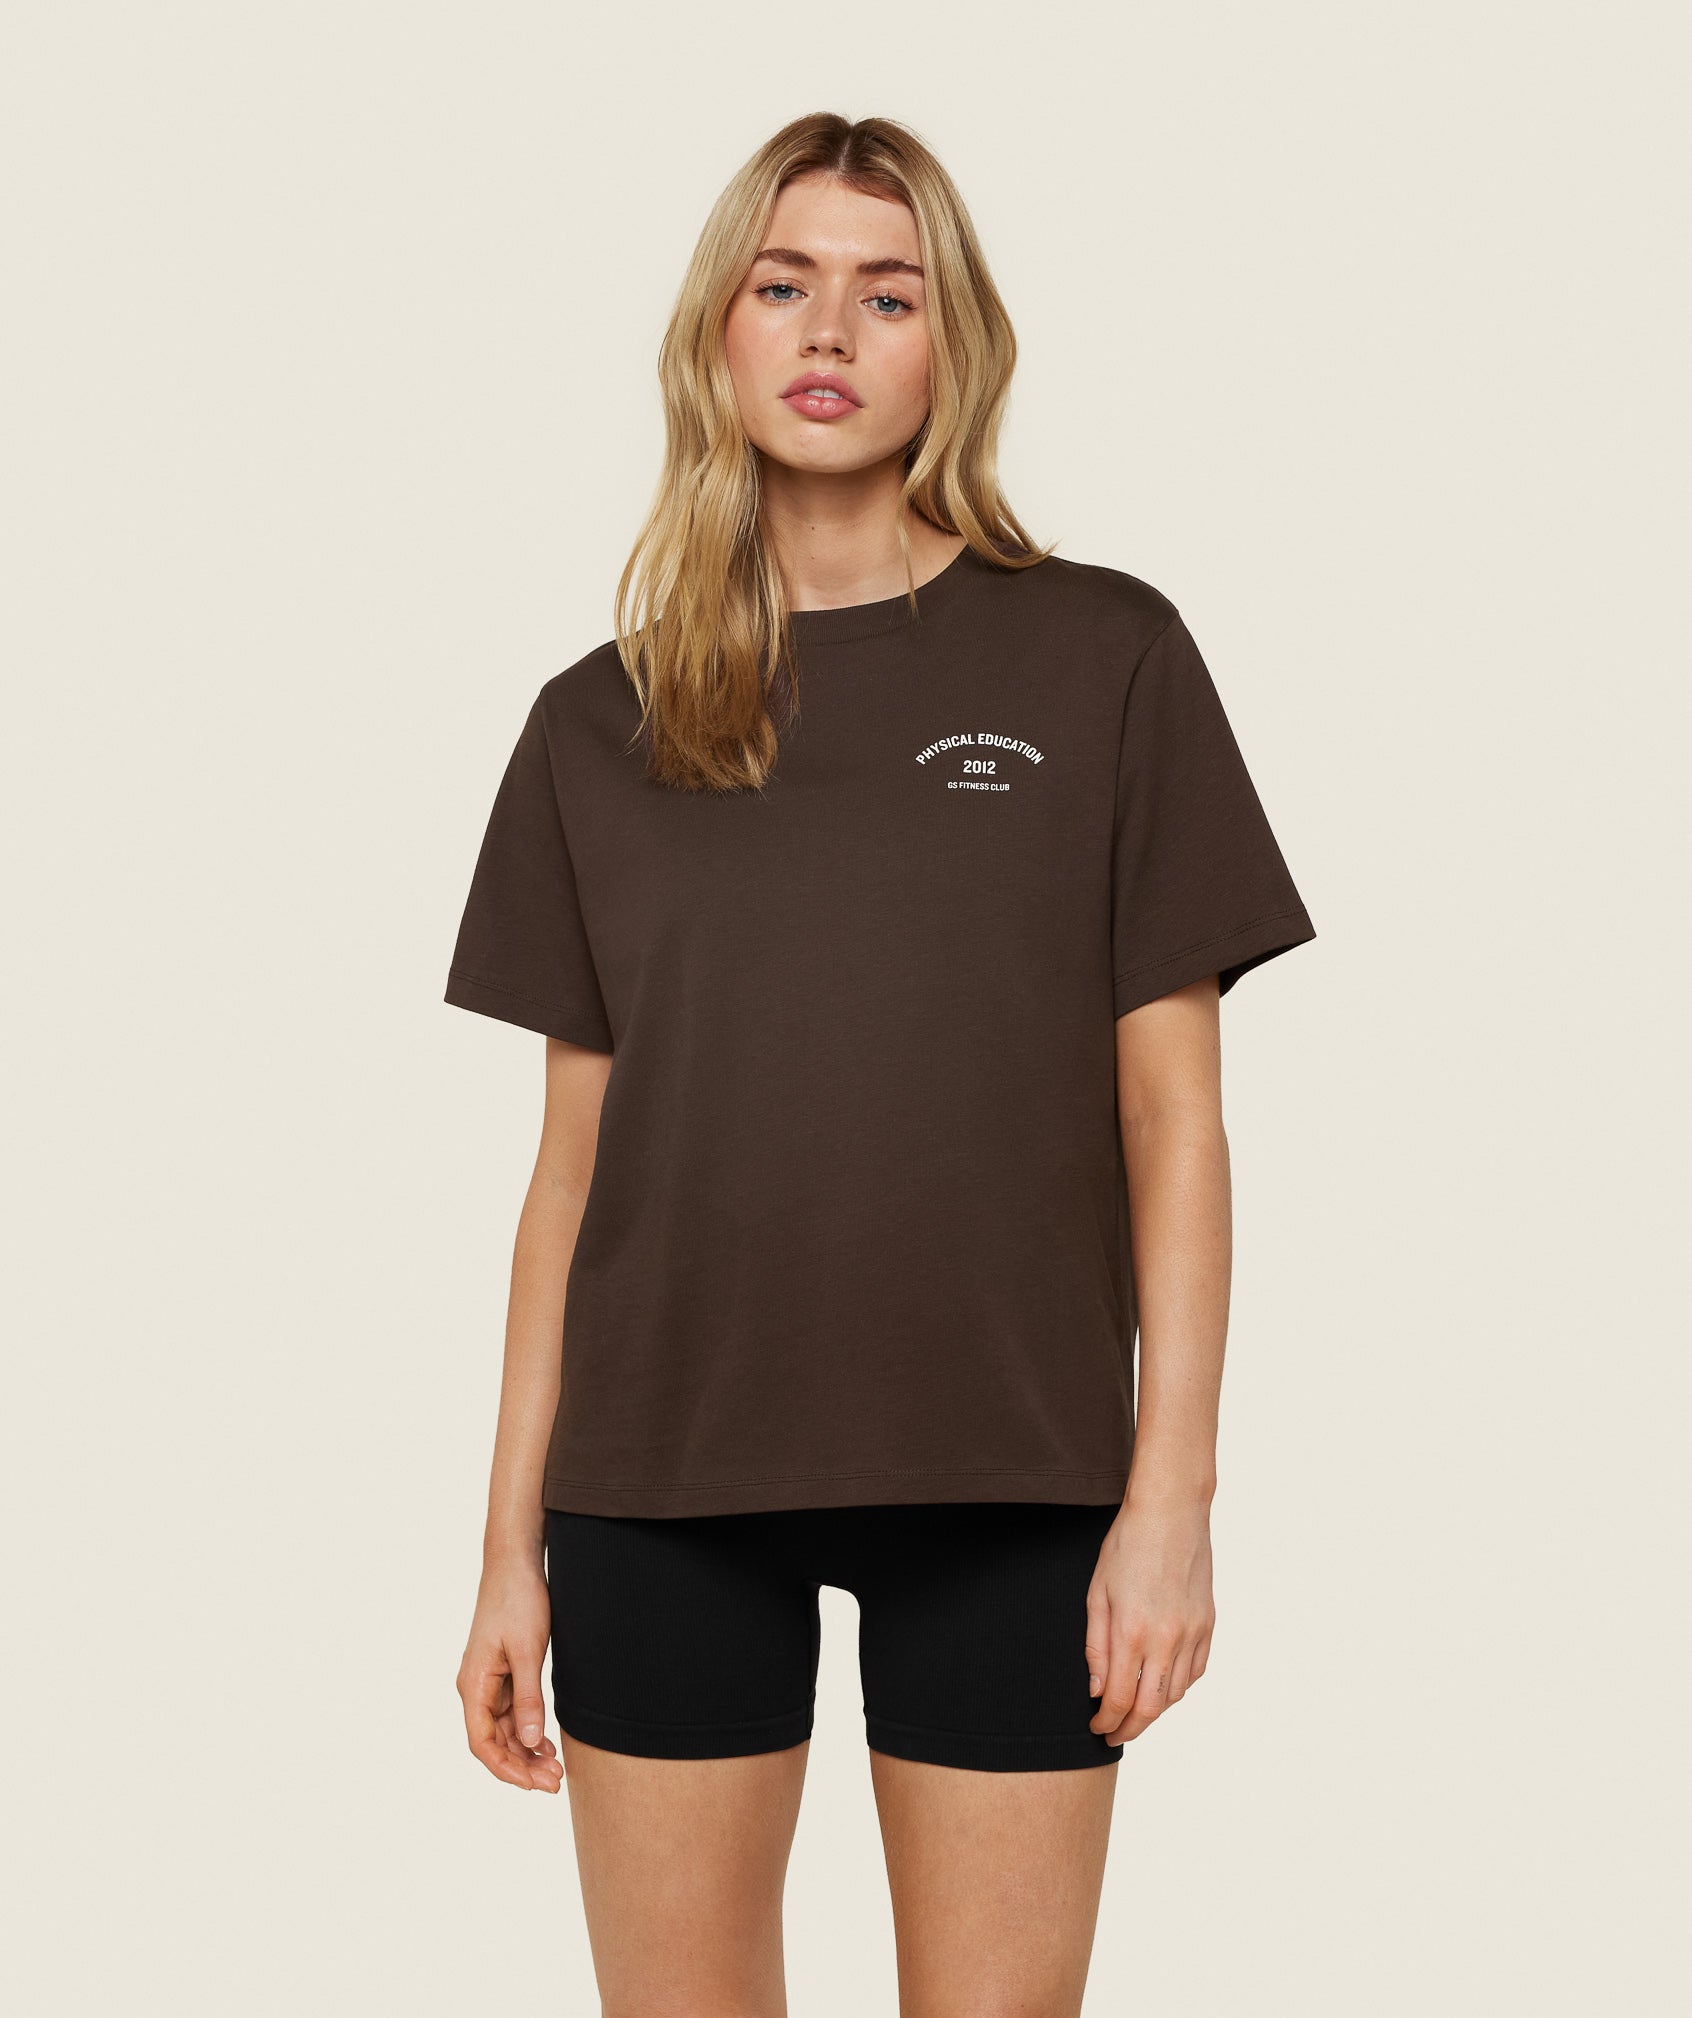 Phys Ed Graphic T-Shirt in Archive Brown - view 1